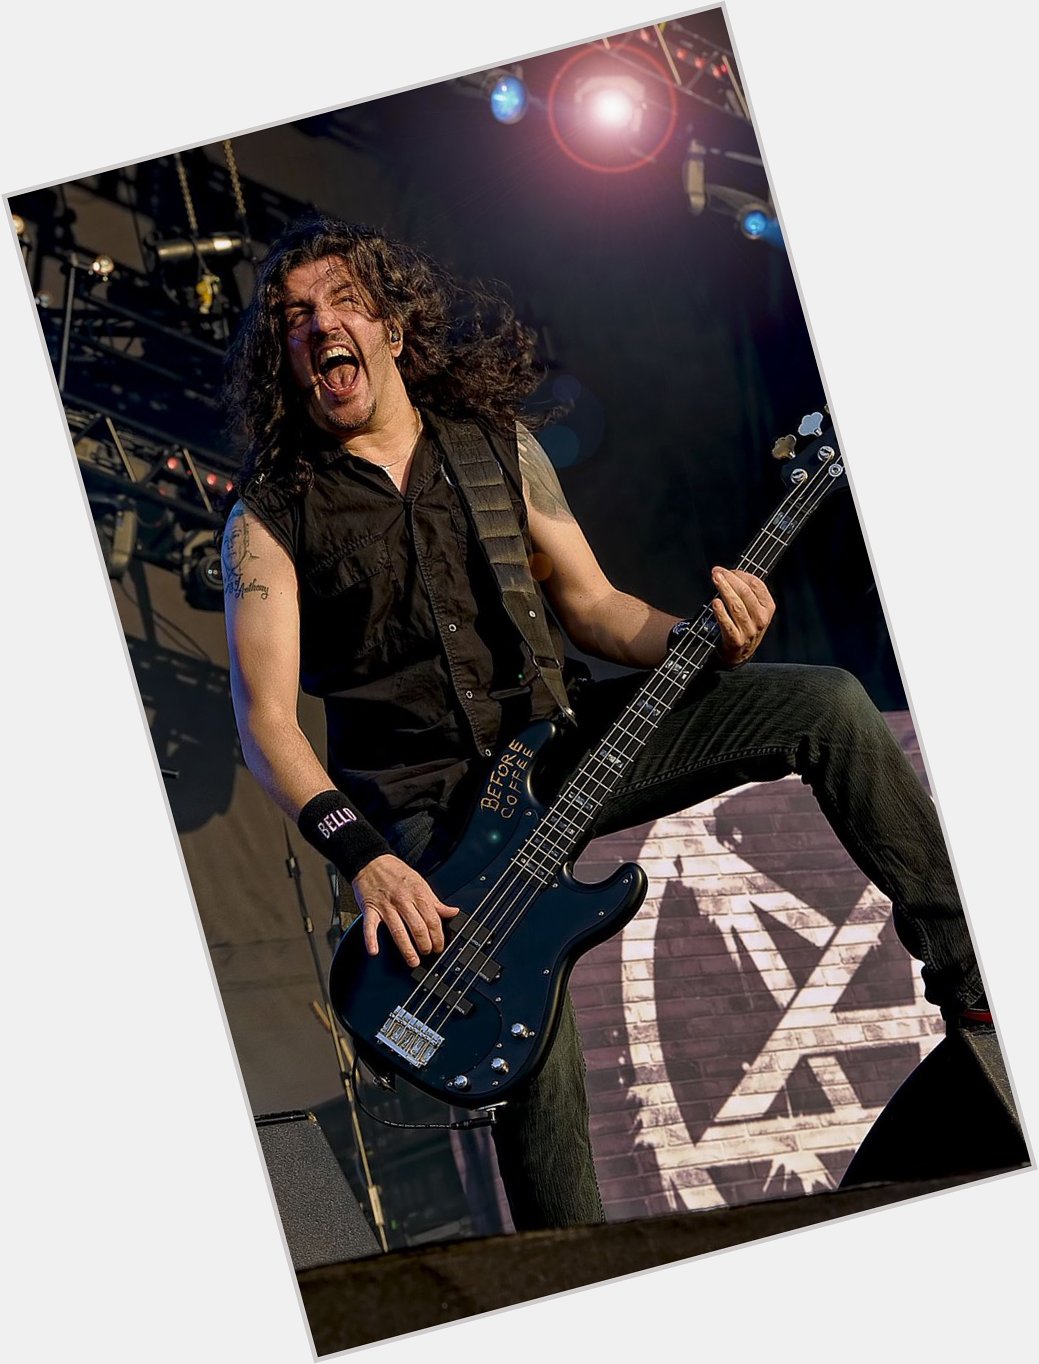 Happy Birthday Frank Bello bassist of the Heavy Metal Band Anthrax         